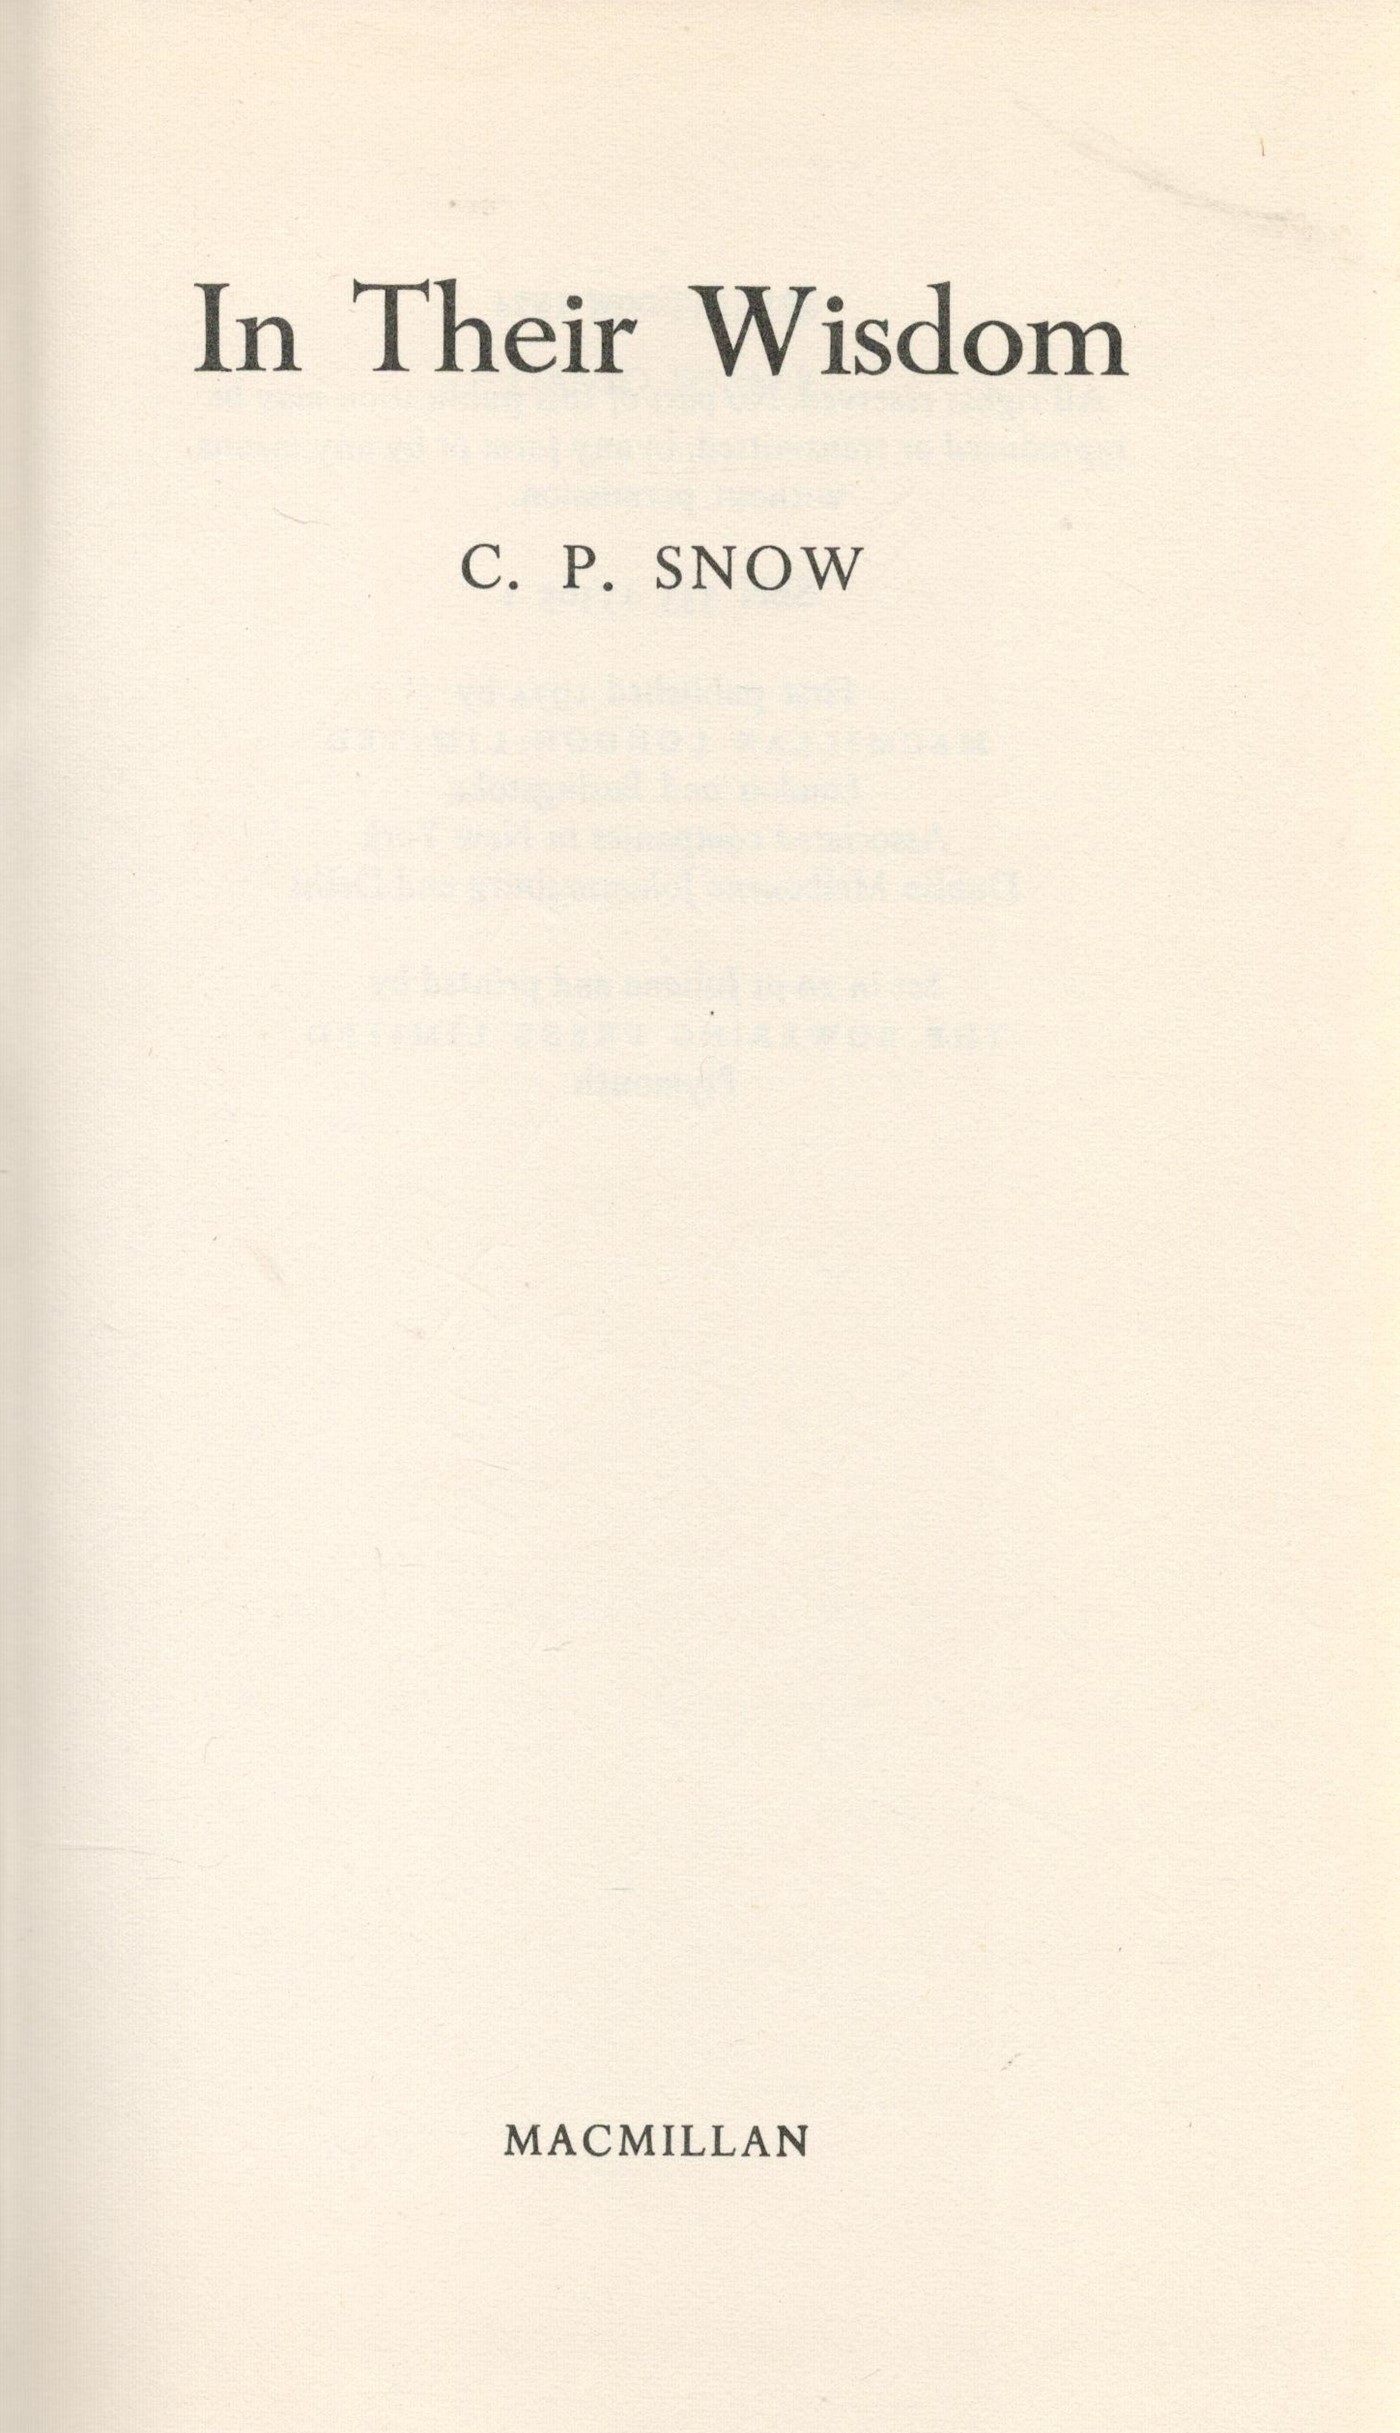 In Their Wisdom by C P Snow Hardback Book 1974 First Edition published by Macmillan London Ltd - Image 2 of 3